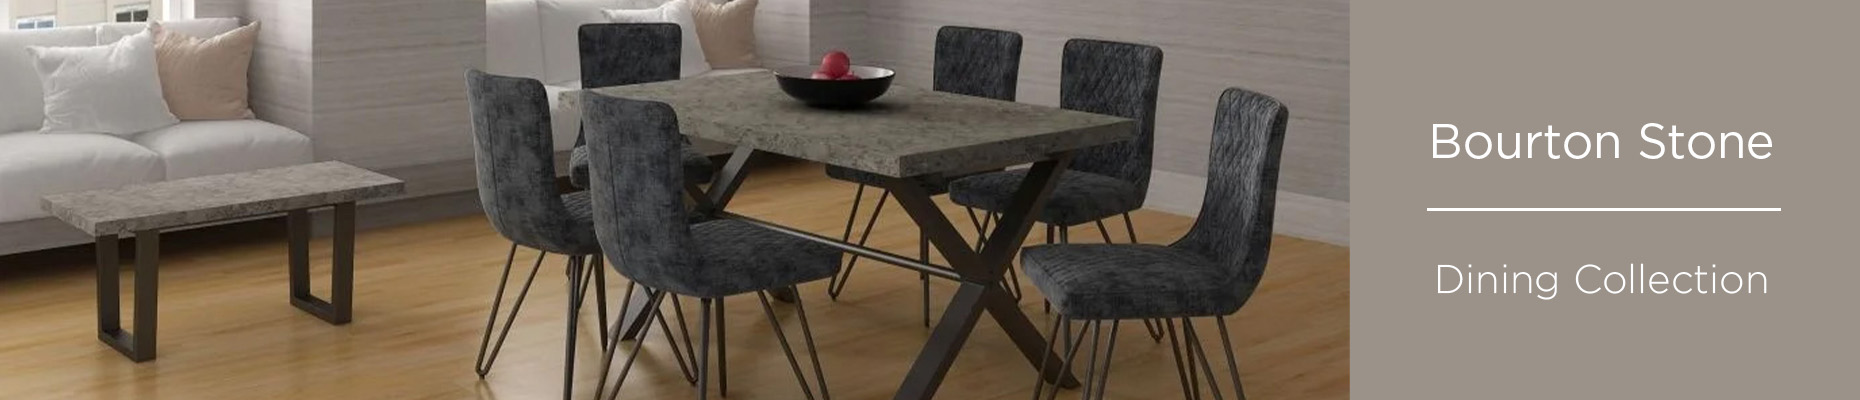 Bourton Stone Dining collection at Forrest Furnishing